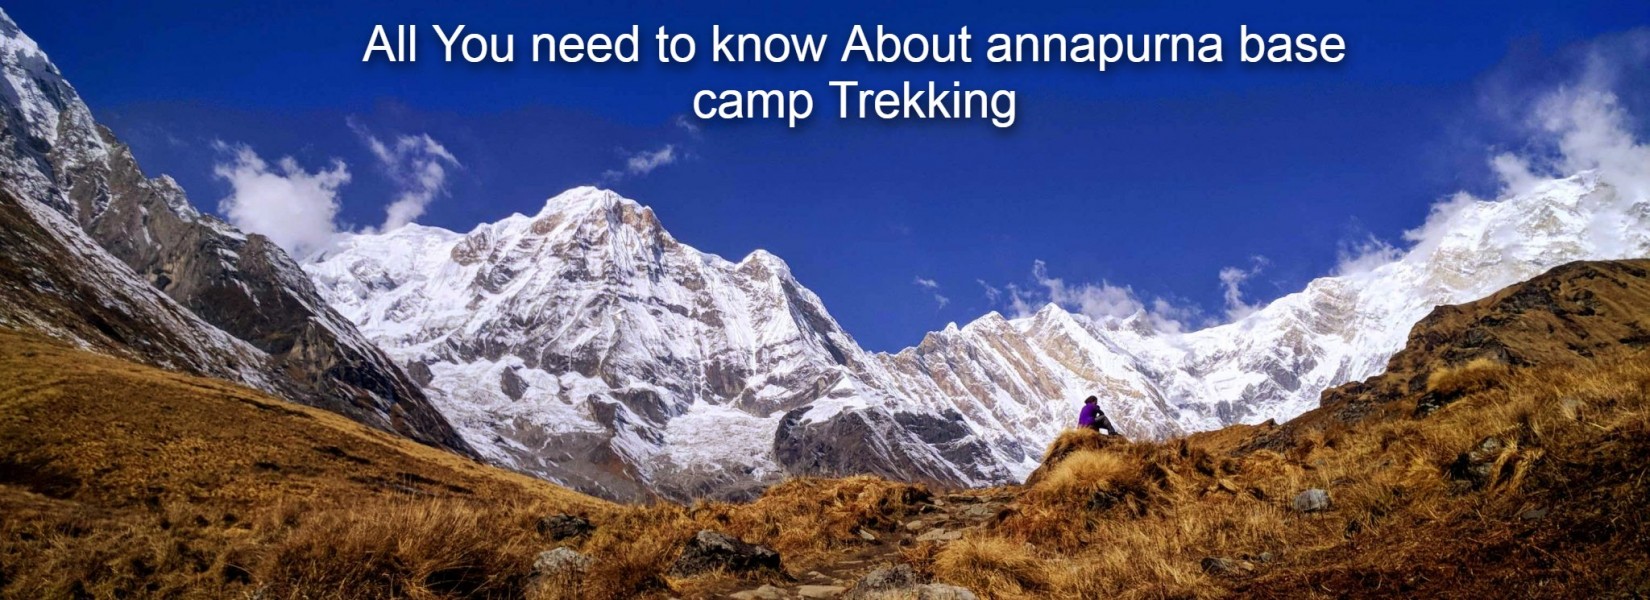 All You Need To Know About Annapurna Base Camp Trek